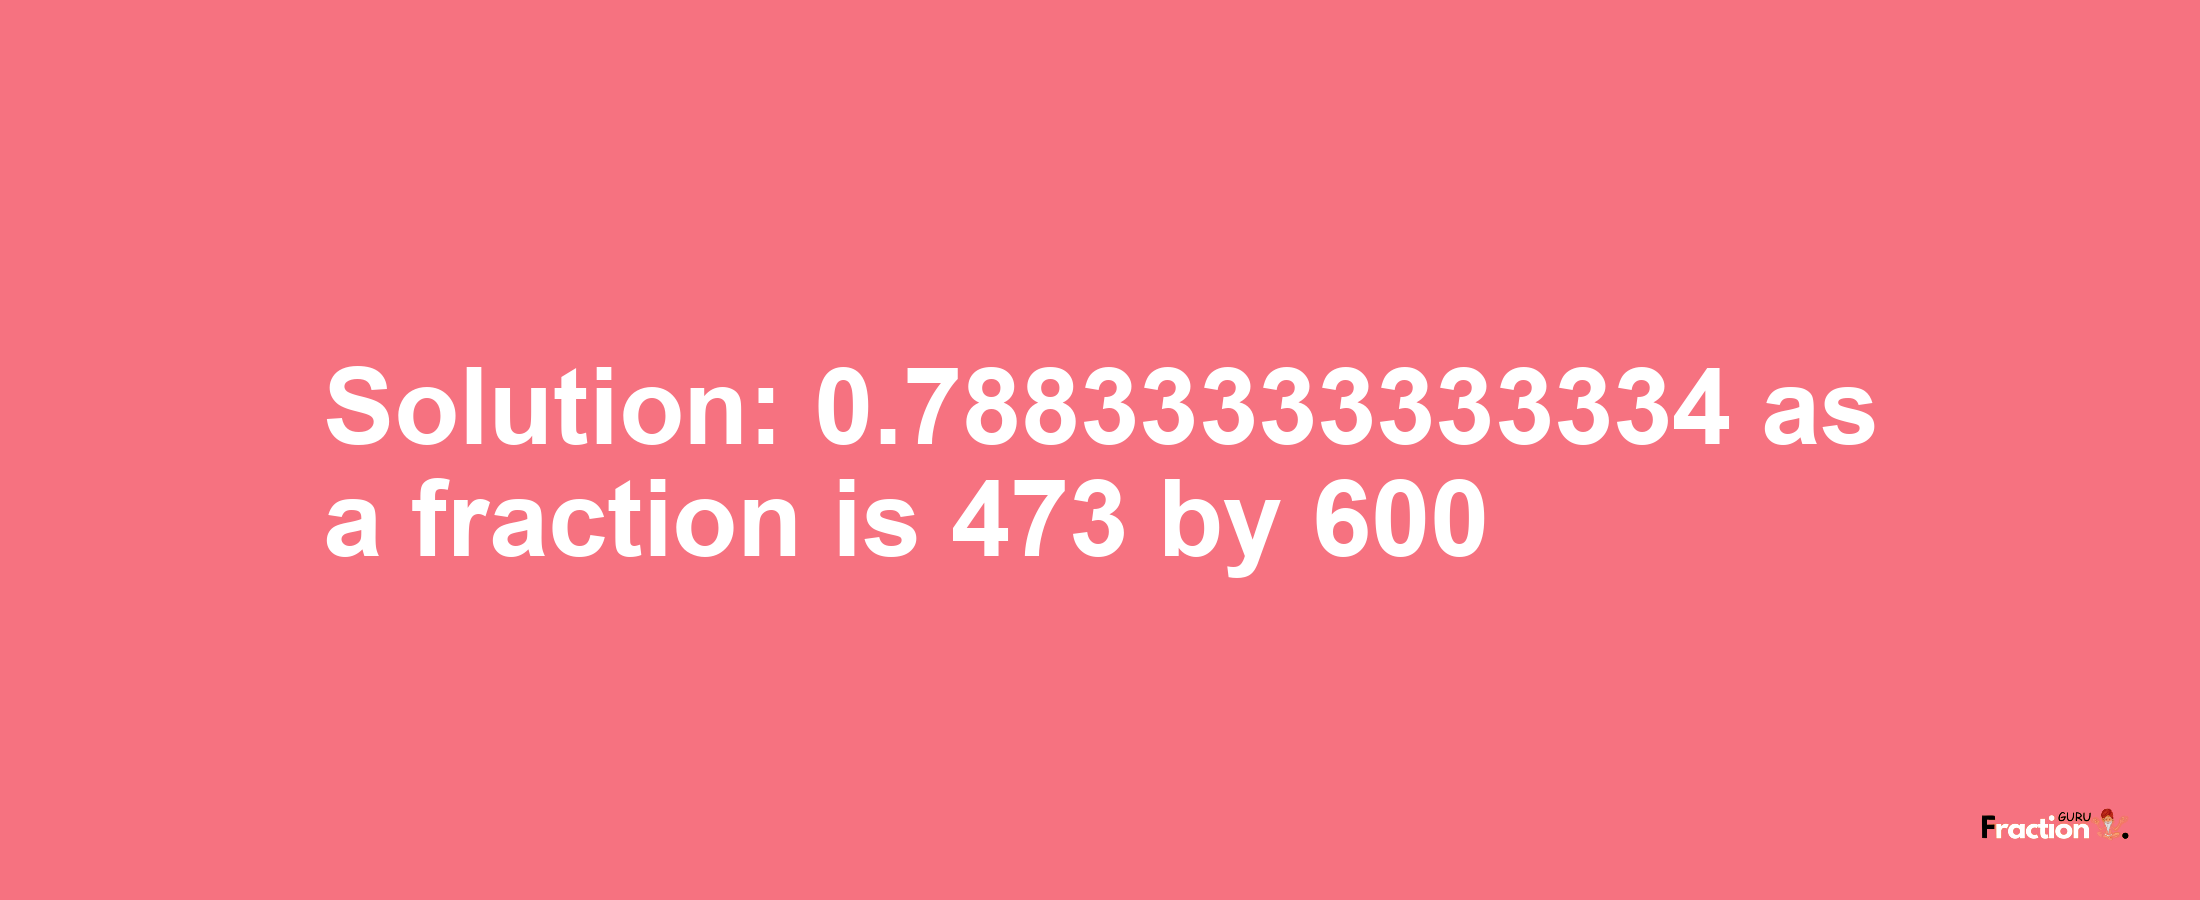 Solution:0.78833333333334 as a fraction is 473/600